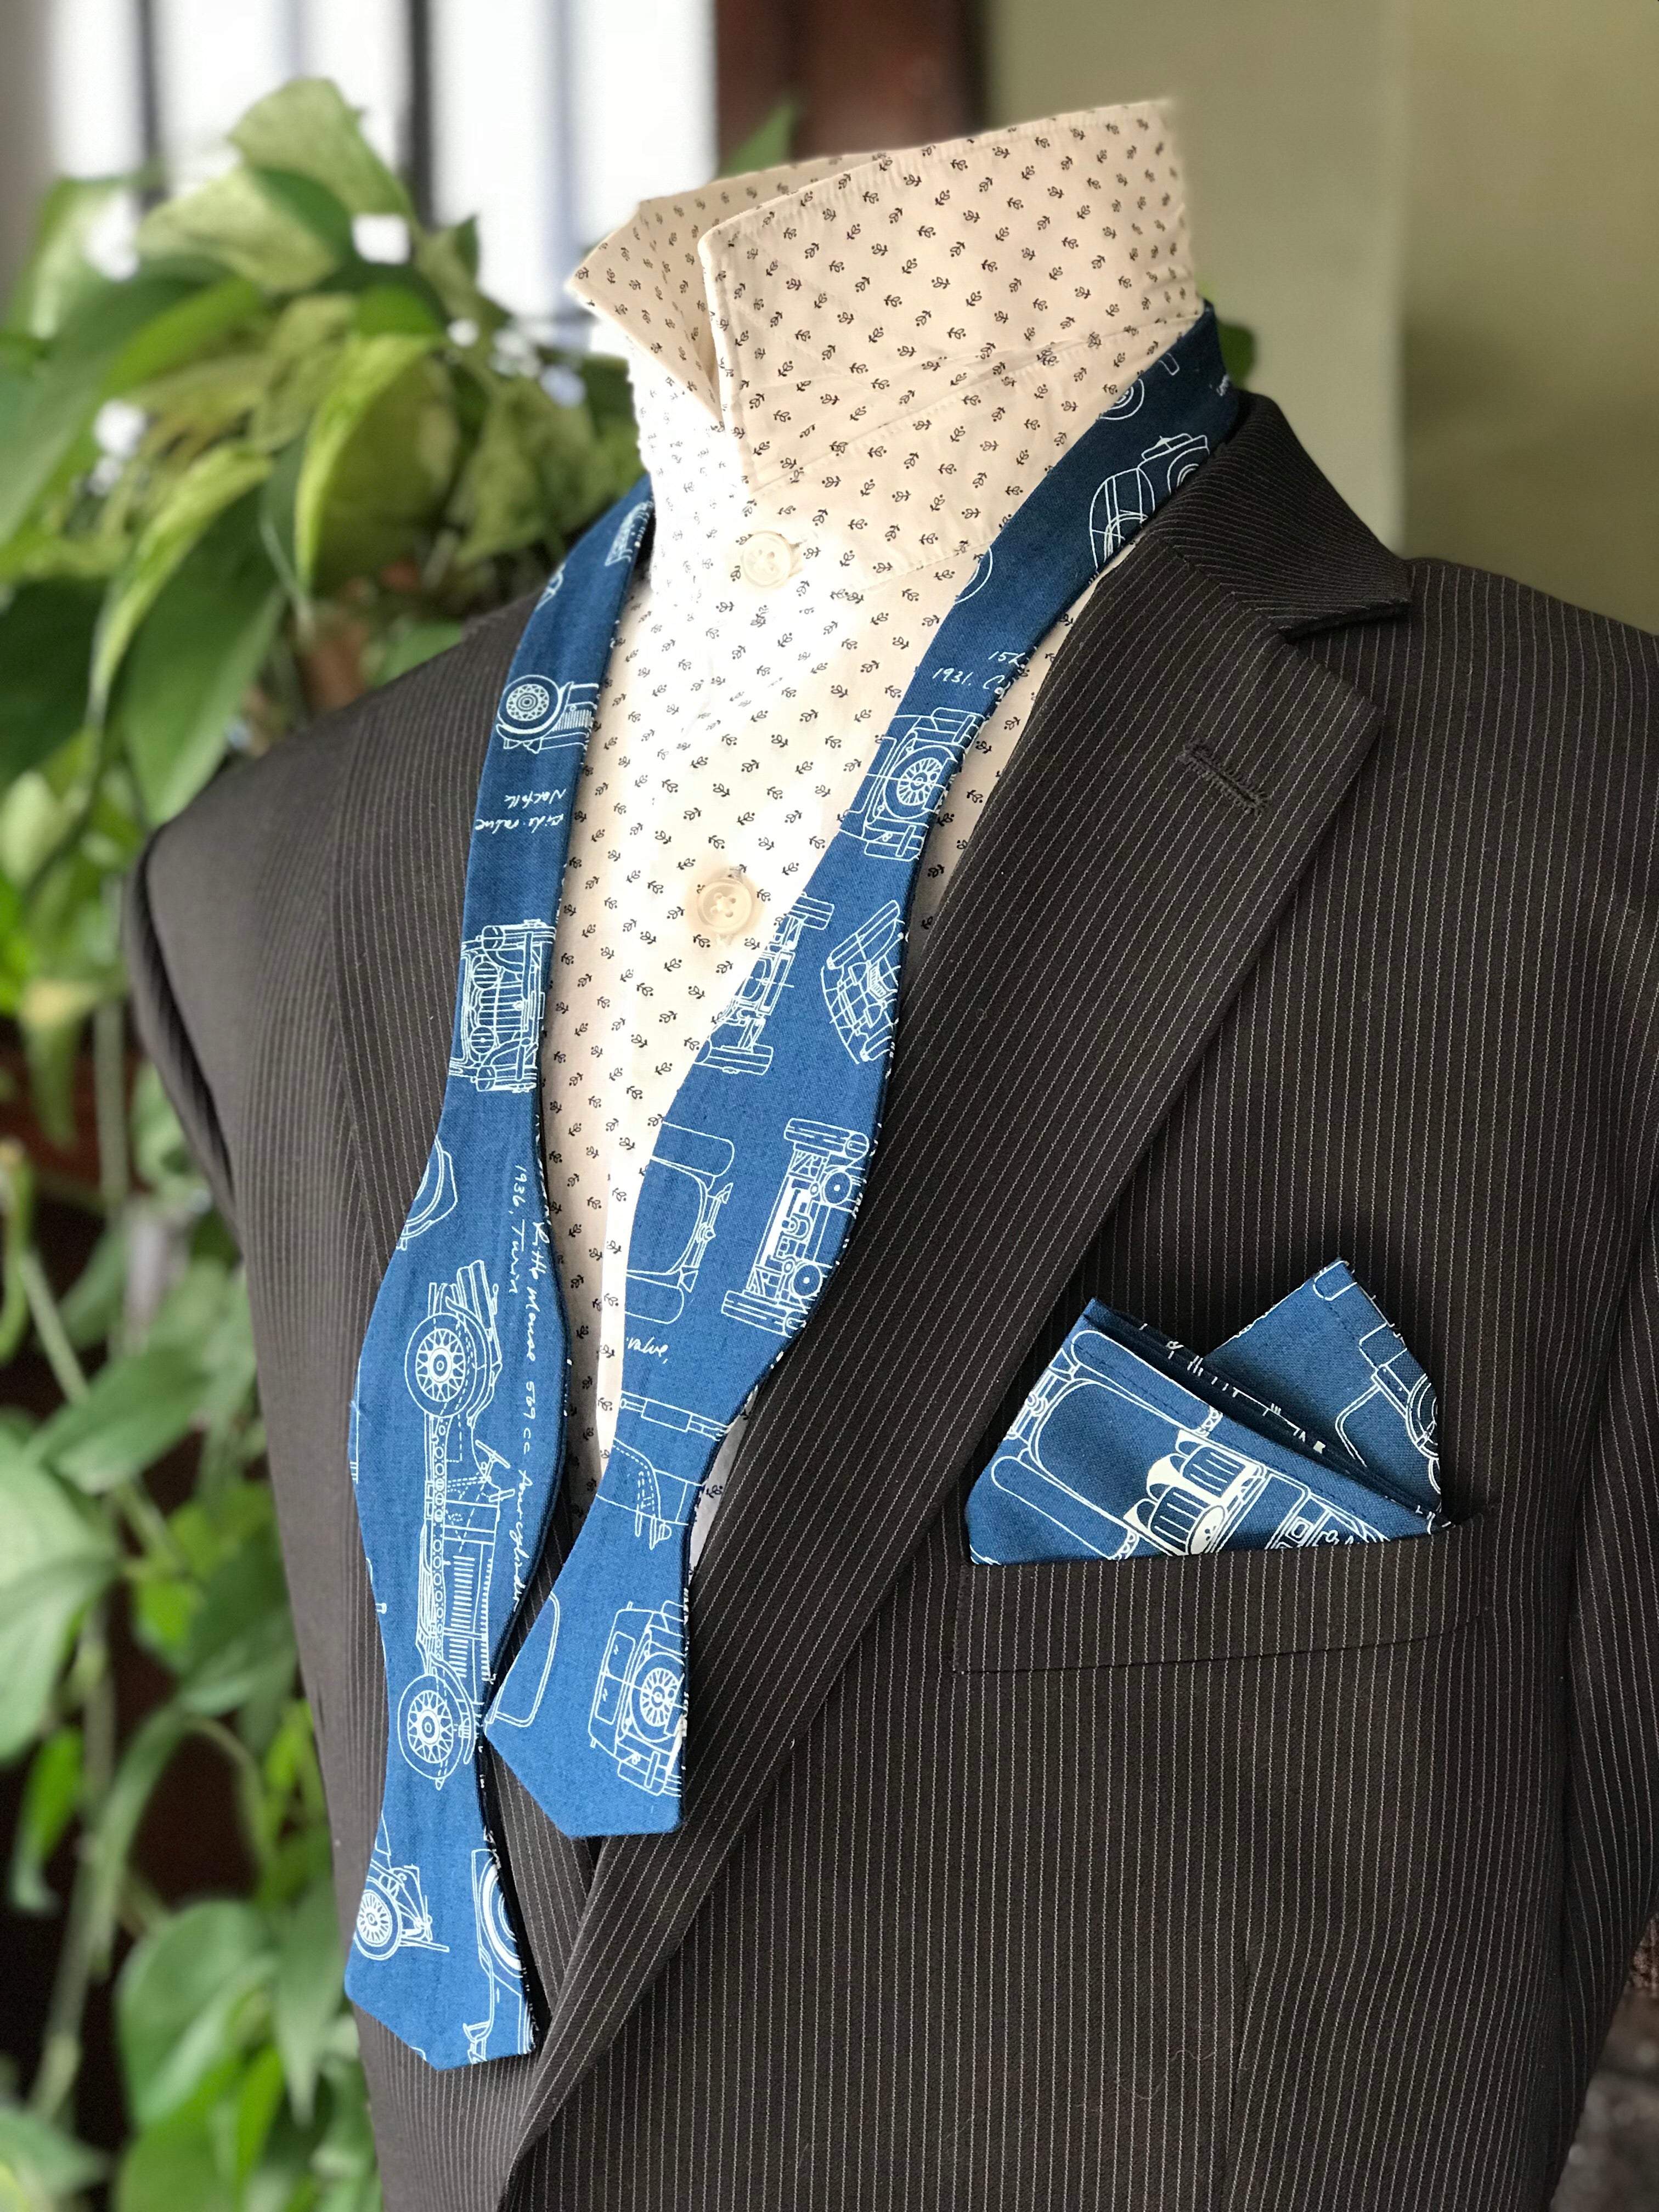 Dapper Gent Self-Tie Bow Tie and Pocket Square - Vintage Drafted Cars - Blue & White